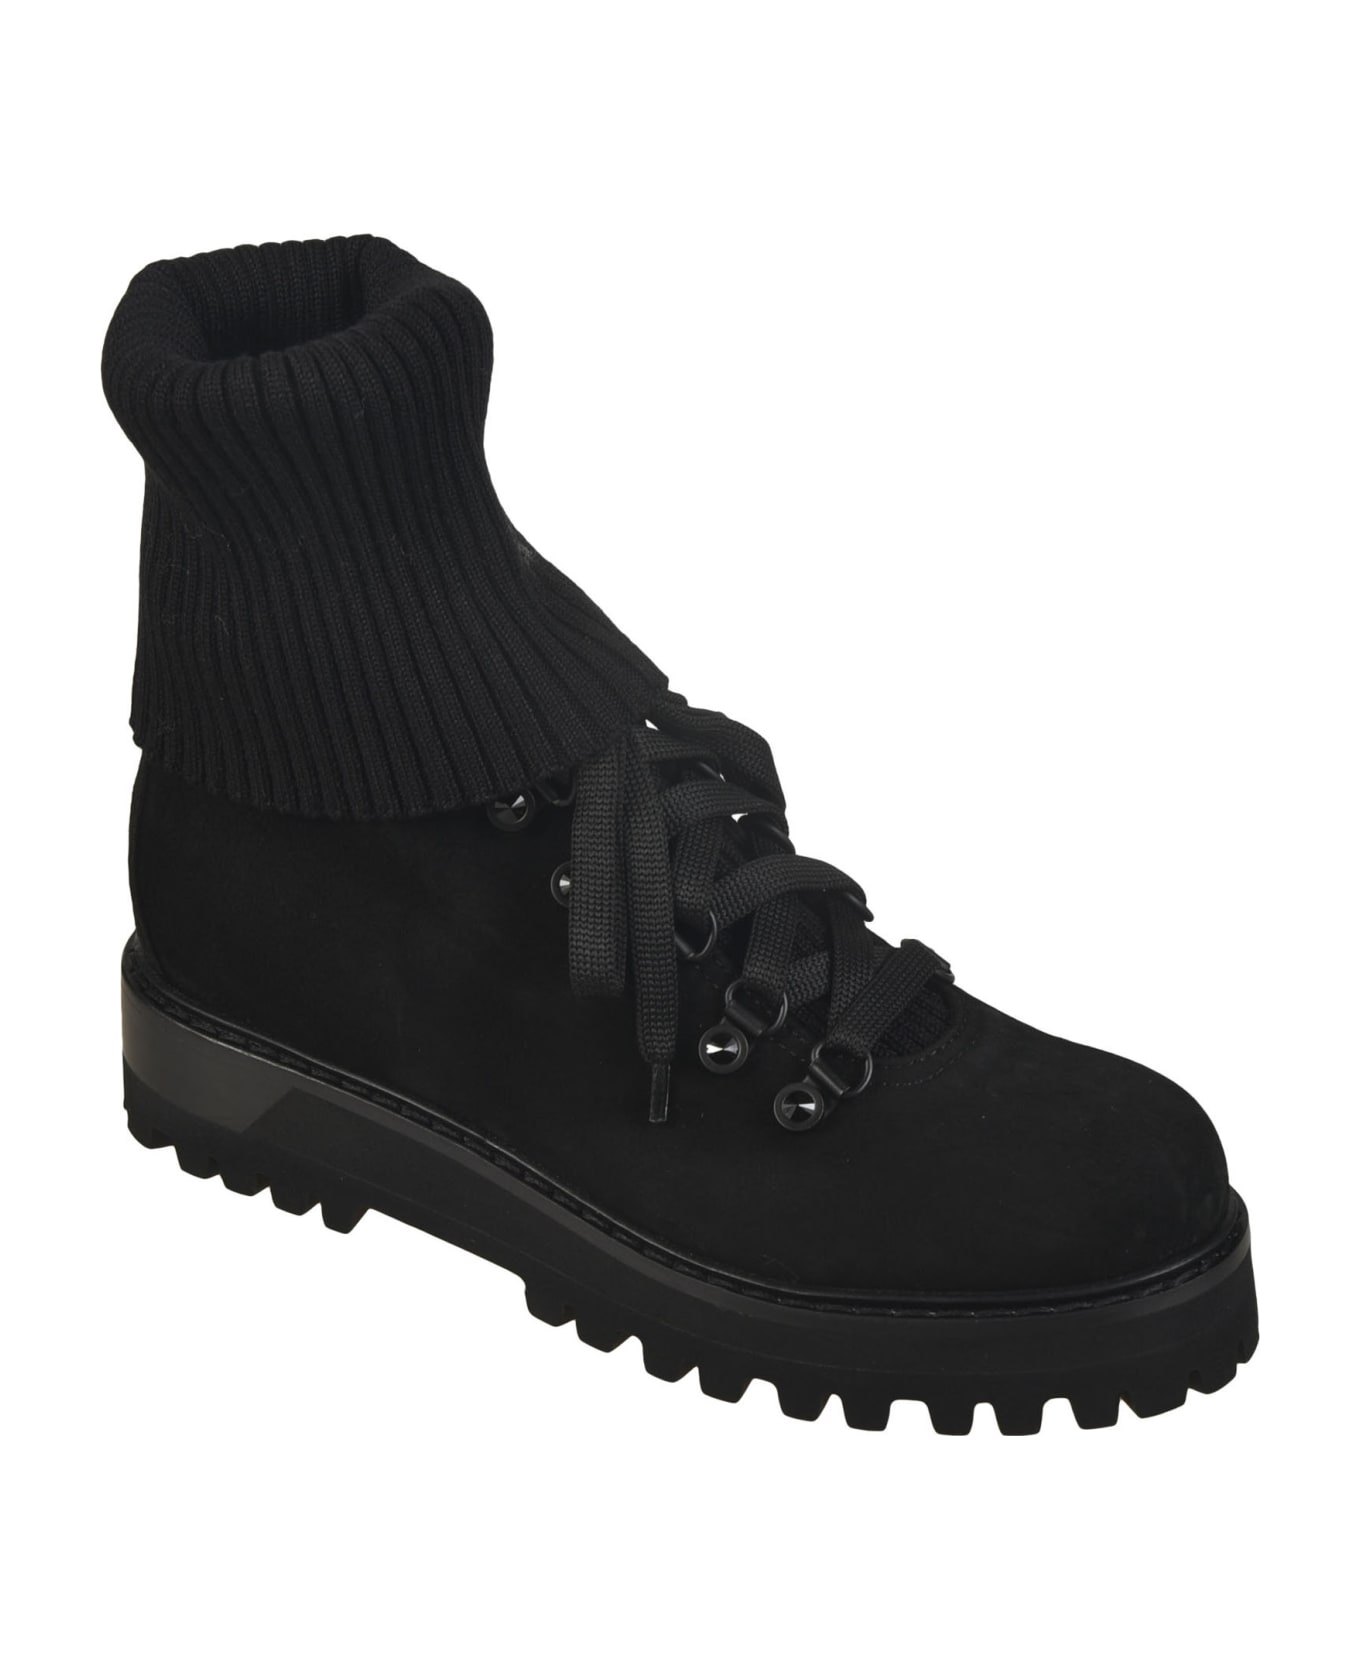 Le Silla Ribbed Lace-up Boots - Black ブーツ